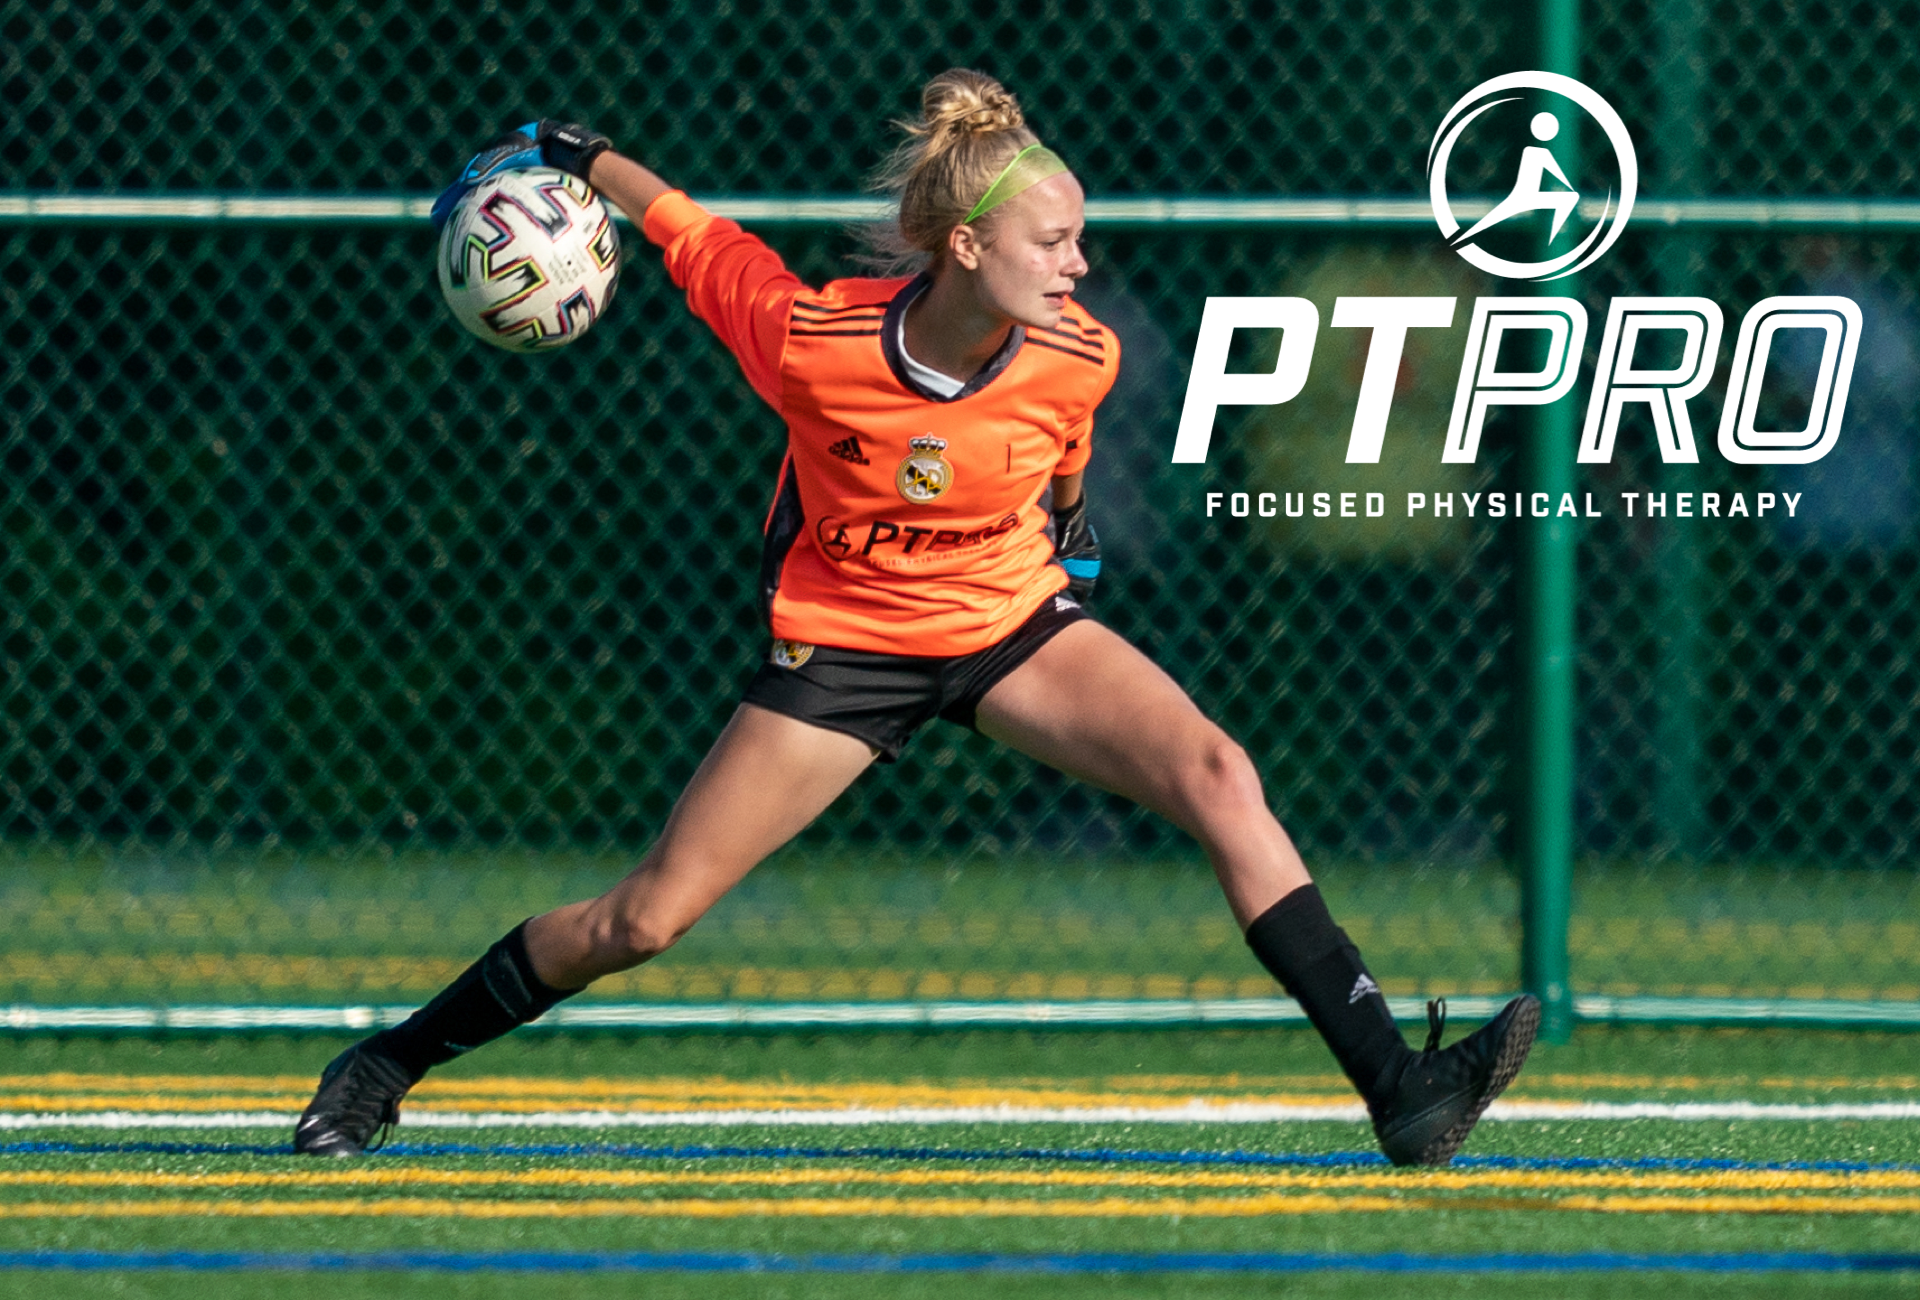 Female goalkeeper wearing orange jersey and black shorts throwing a soccer ball underarm with PTPRO logo in the image